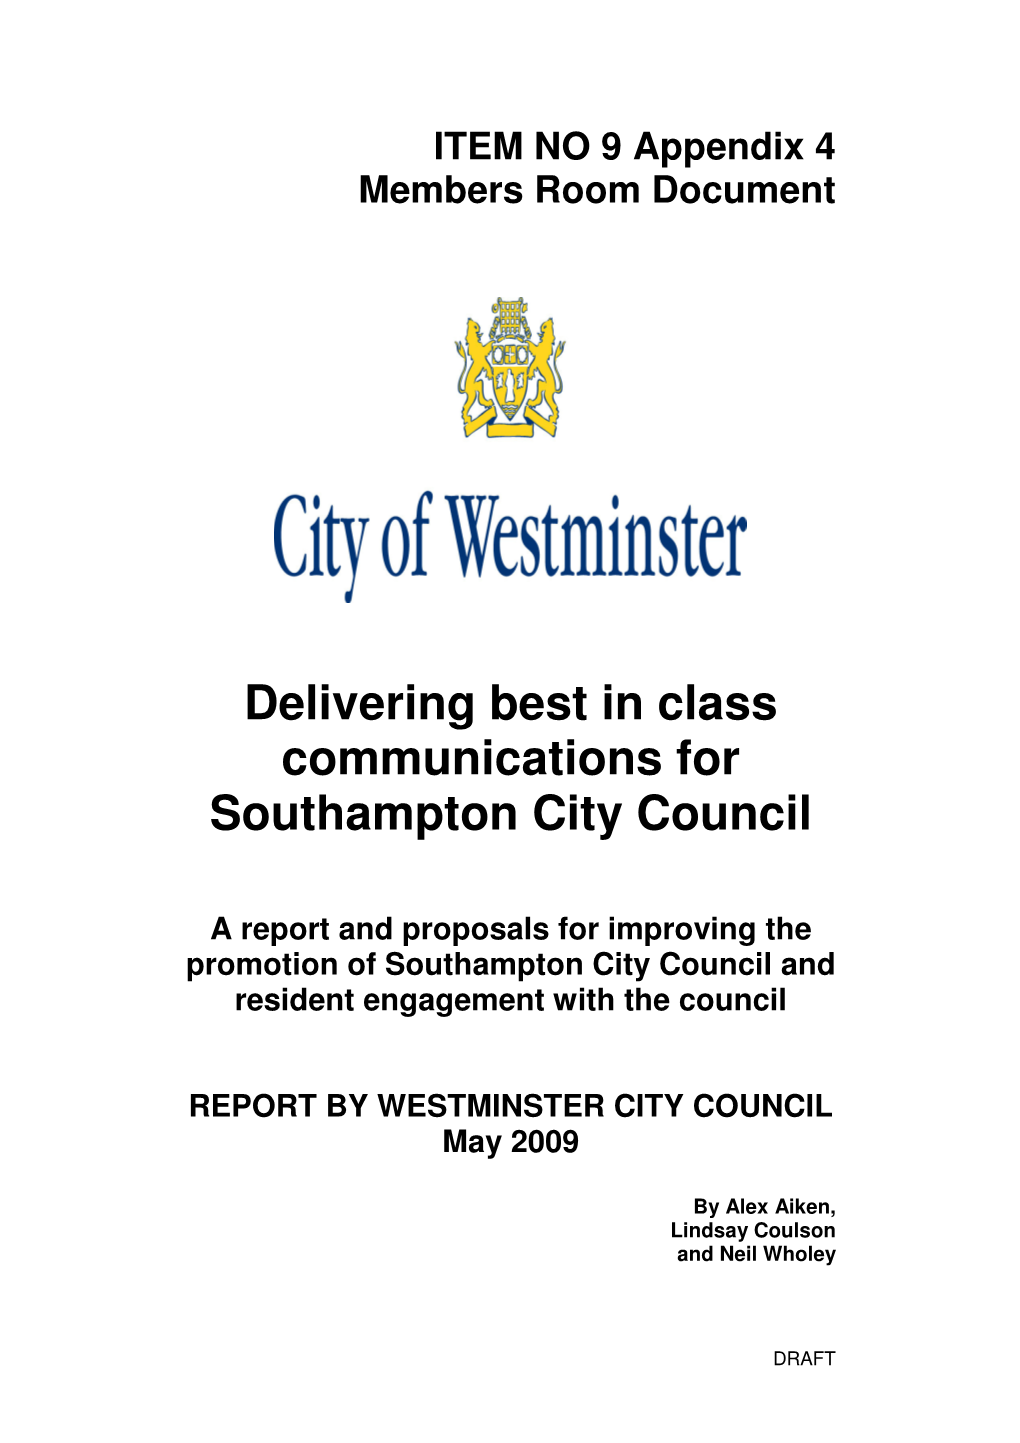 Delivering Best in Class Communications for Southampton City Council